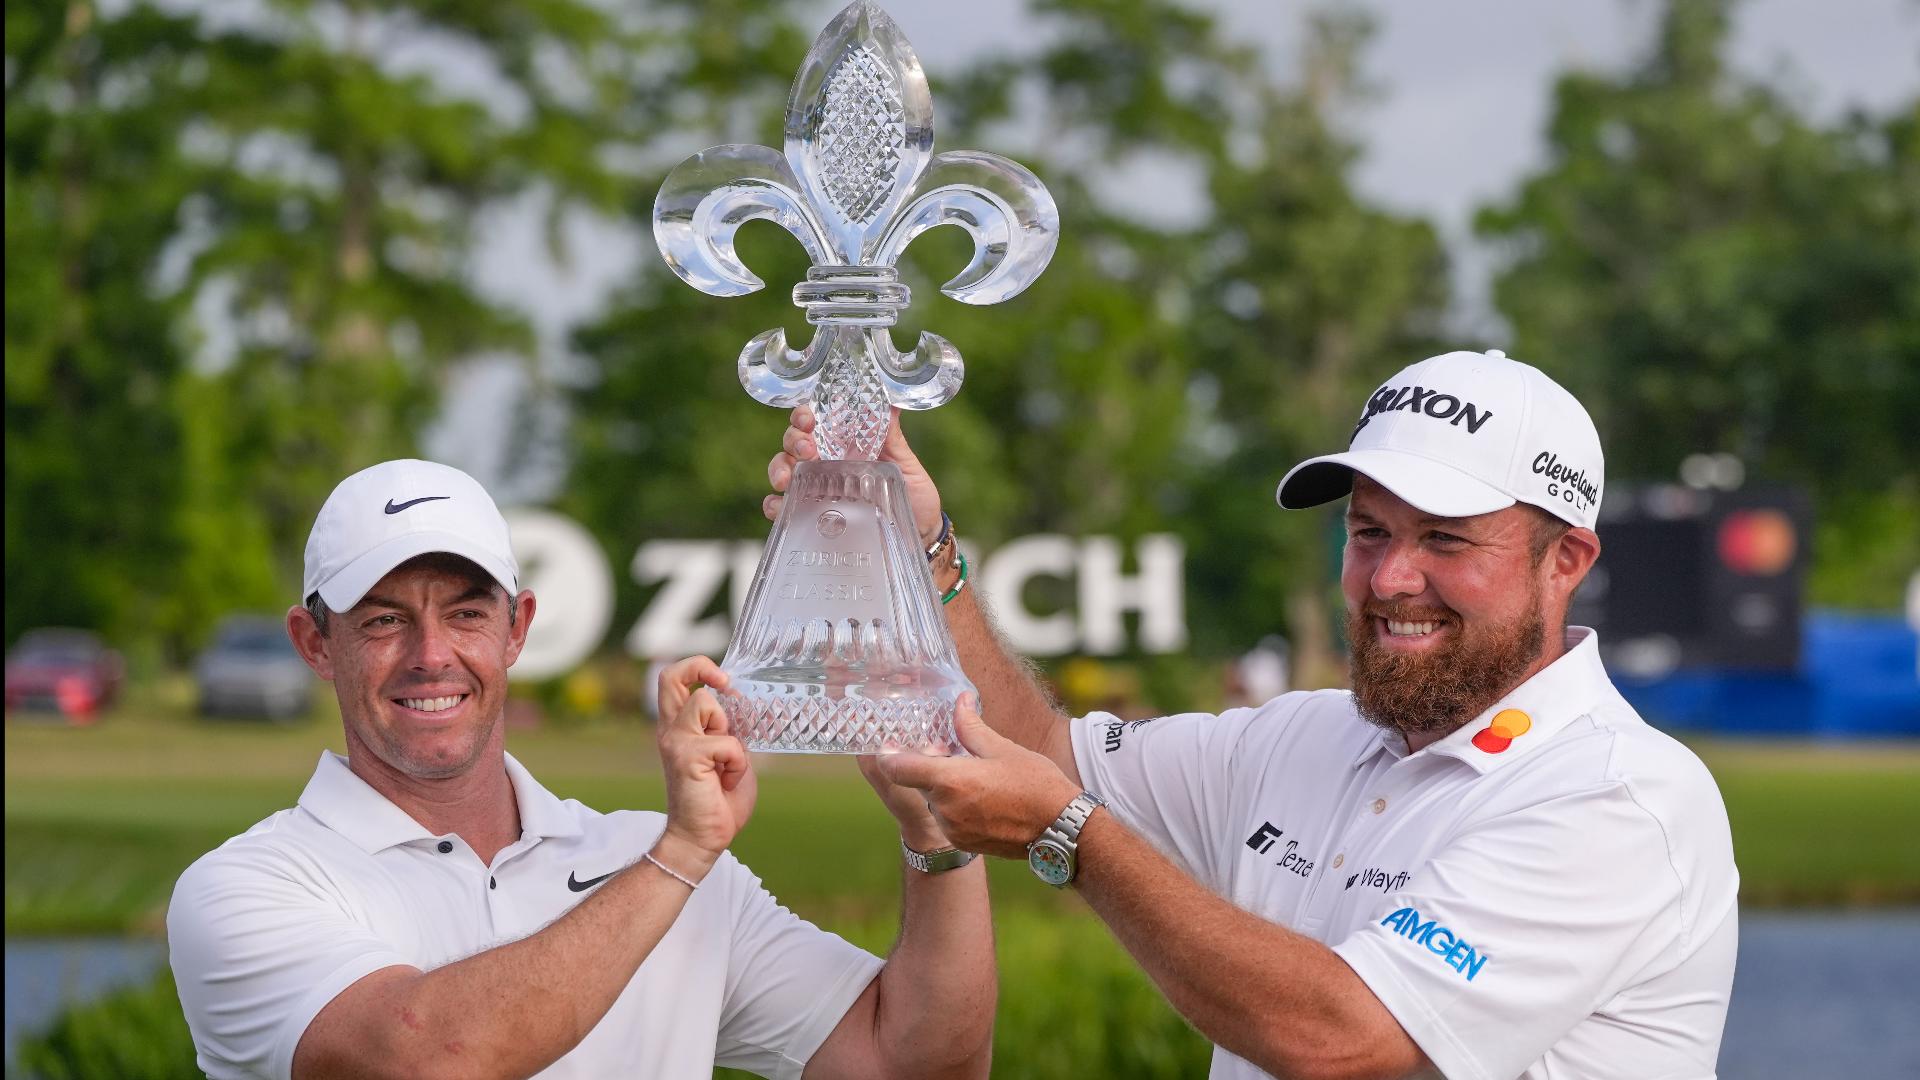 McIlroy and Shane Lowry won Sunday, beating Chad Ramey and Martin Trainer with a nervy par on the first hole of a playoff.